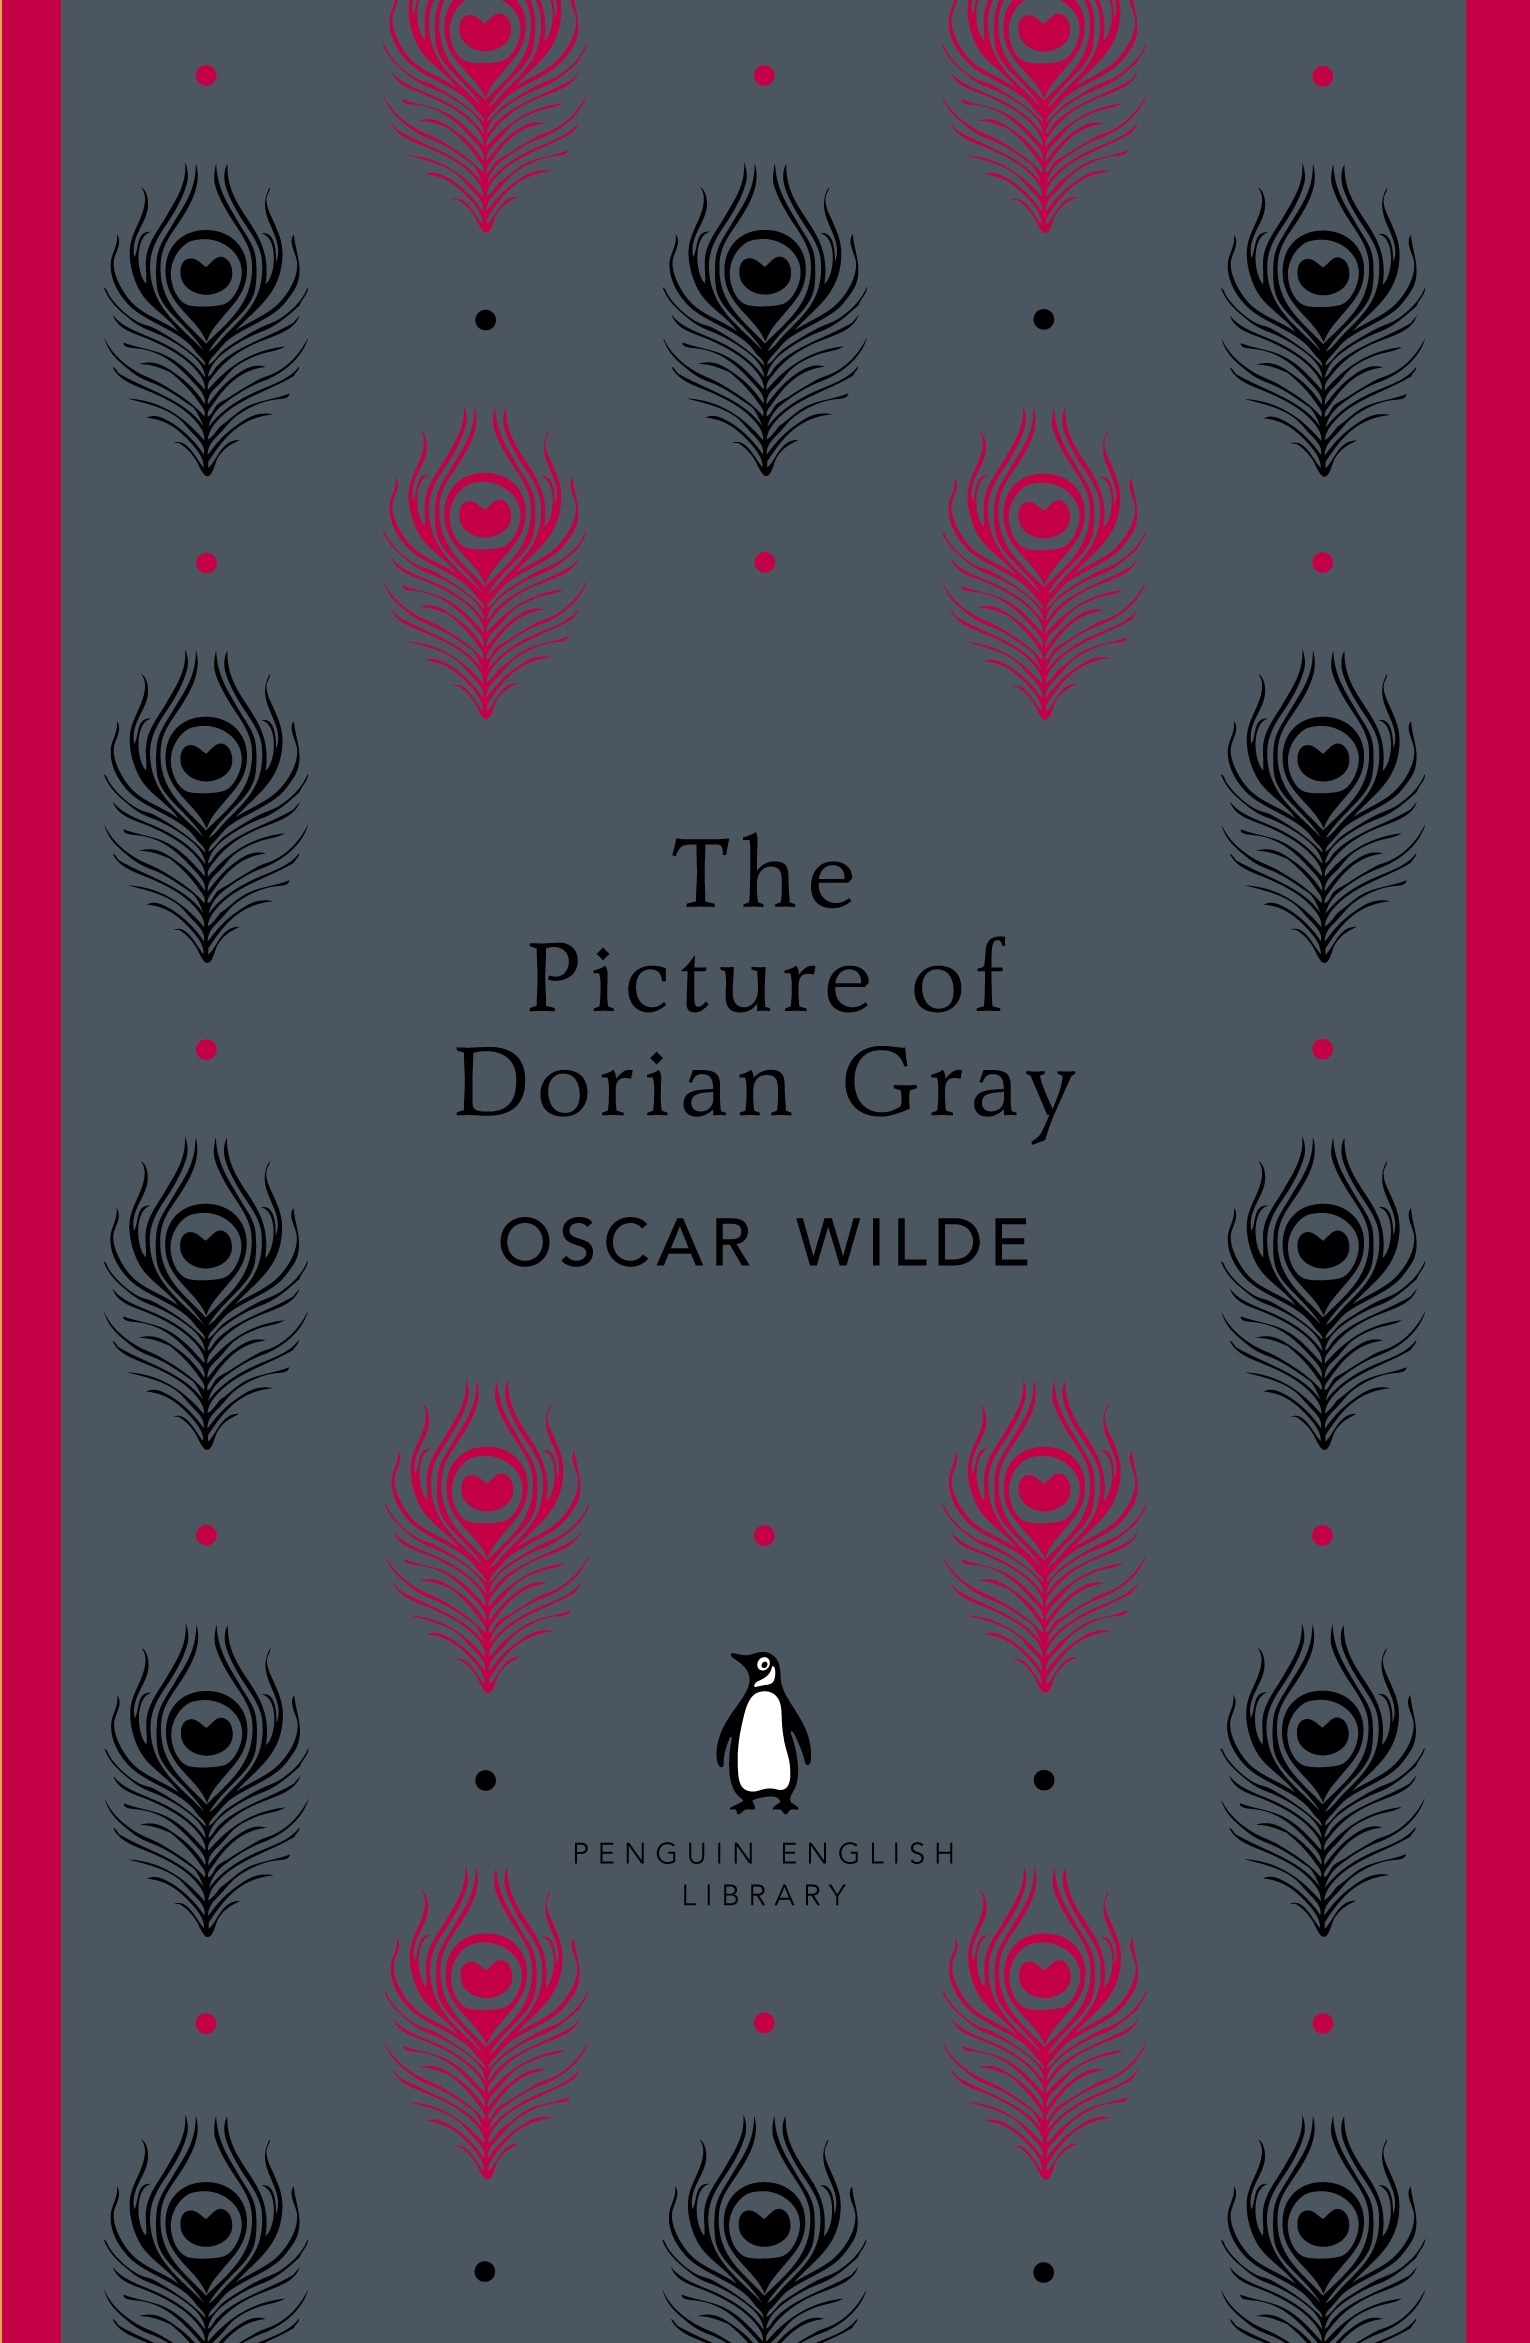 Book “The Picture of Dorian Gray” by Oscar Wilde — June 28, 2012